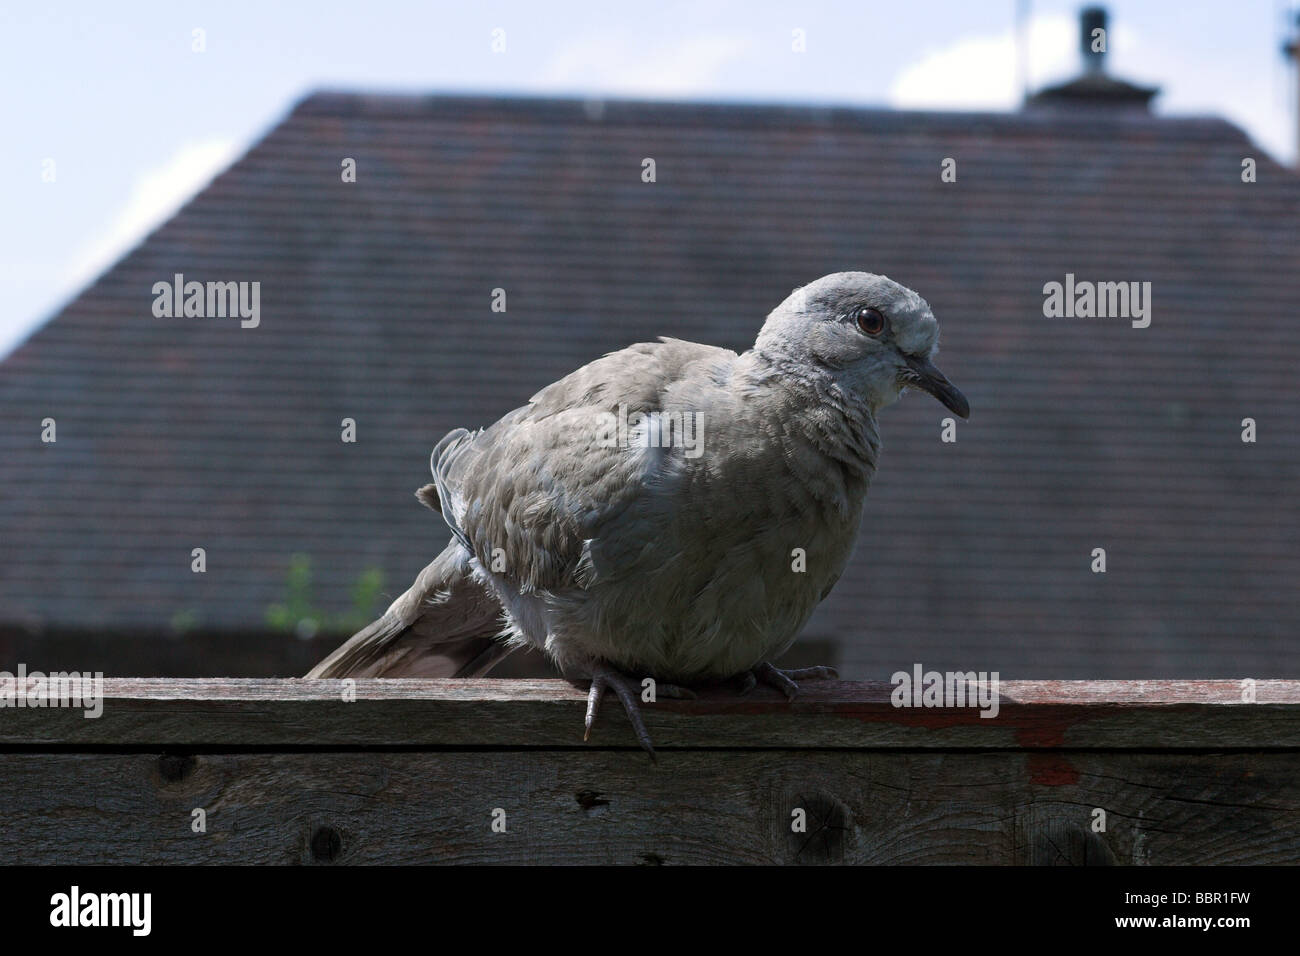 Young Collared Dove perched on garden fence. Stock Photo